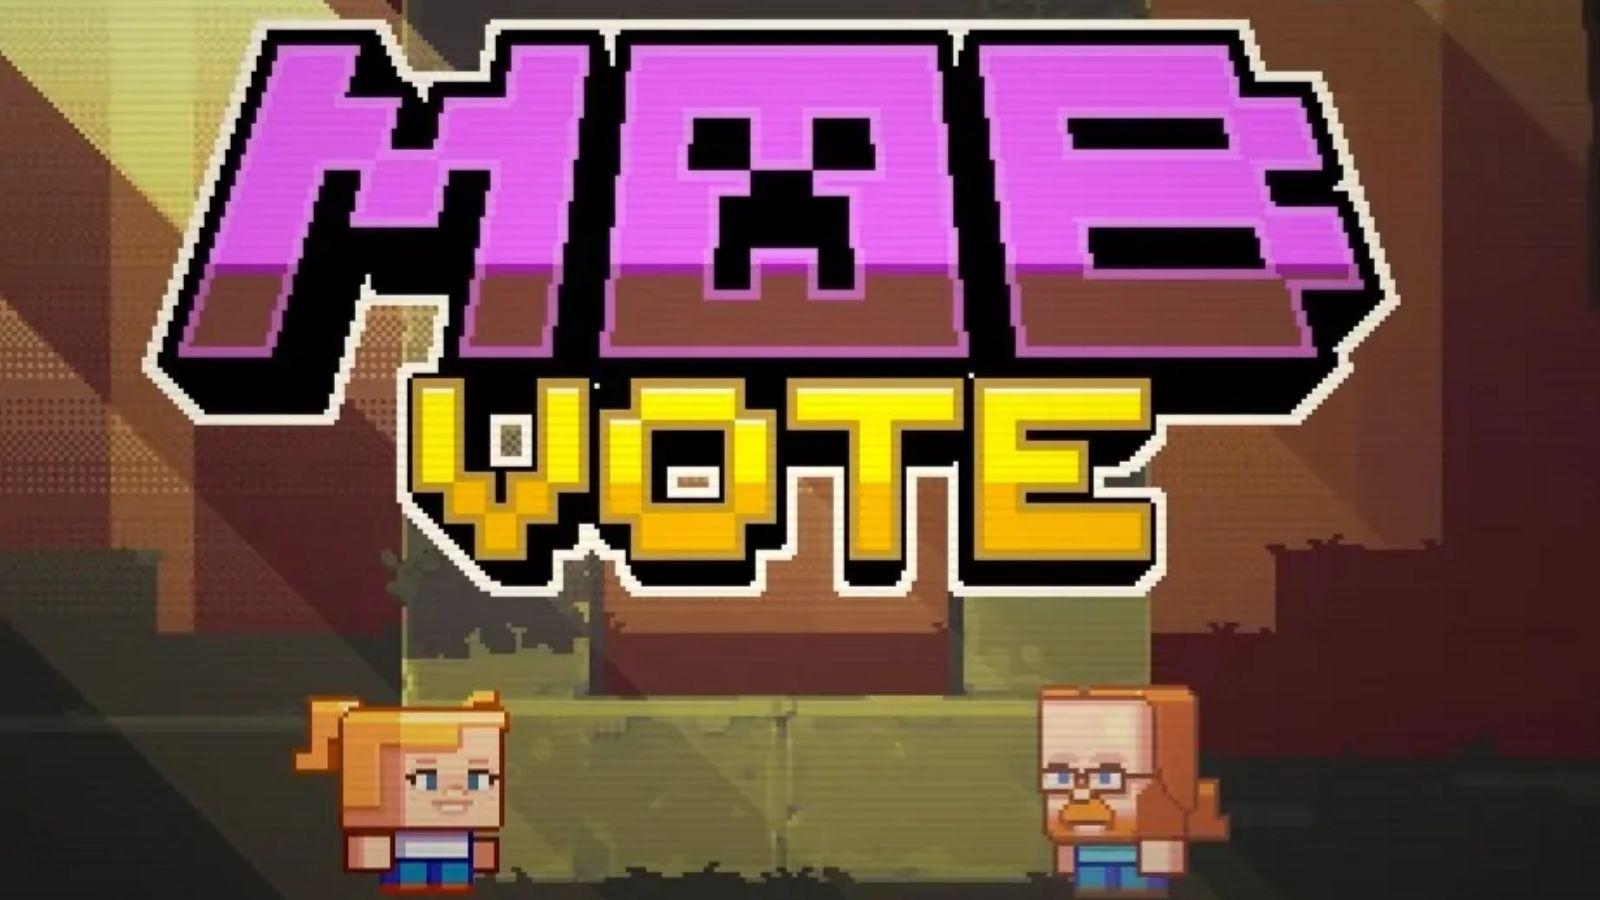 List of mobs revealed for Minecraft Live 2021, and which one to vote for